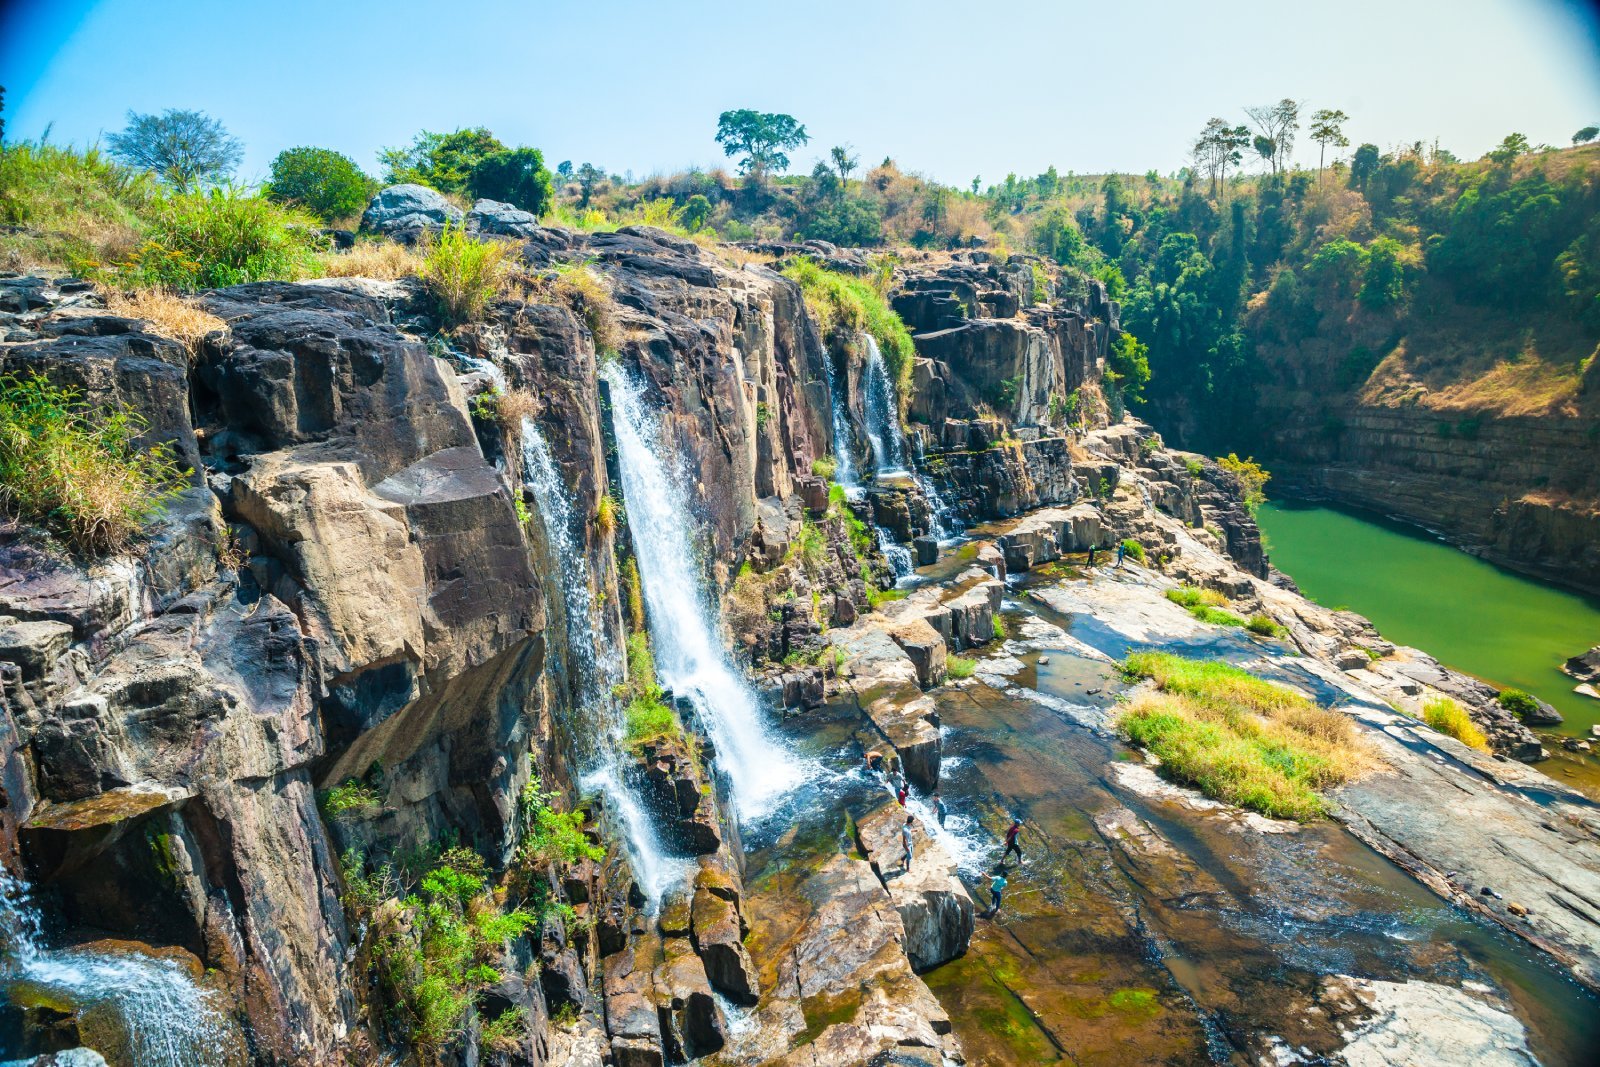 <p class="wp-caption-text">Image Credit: Shutterstock / Romas_Photo</p>  <p><span>Nestled in the South Central Highlands of Vietnam, Da Lat is known for its mild climate, scenic landscapes, and French colonial architecture. This city is a retreat from the tropical climate, offering lush gardens, serene lakes, and waterfalls. Da Lat is also famous for its agriculture, producing flowers, vegetables, and fruits, especially strawberries. The city’s attractions include the Valley of Love, Da Lat Flower Gardens, and the unique Crazy House, a whimsical guesthouse with organic architecture.</span></p>